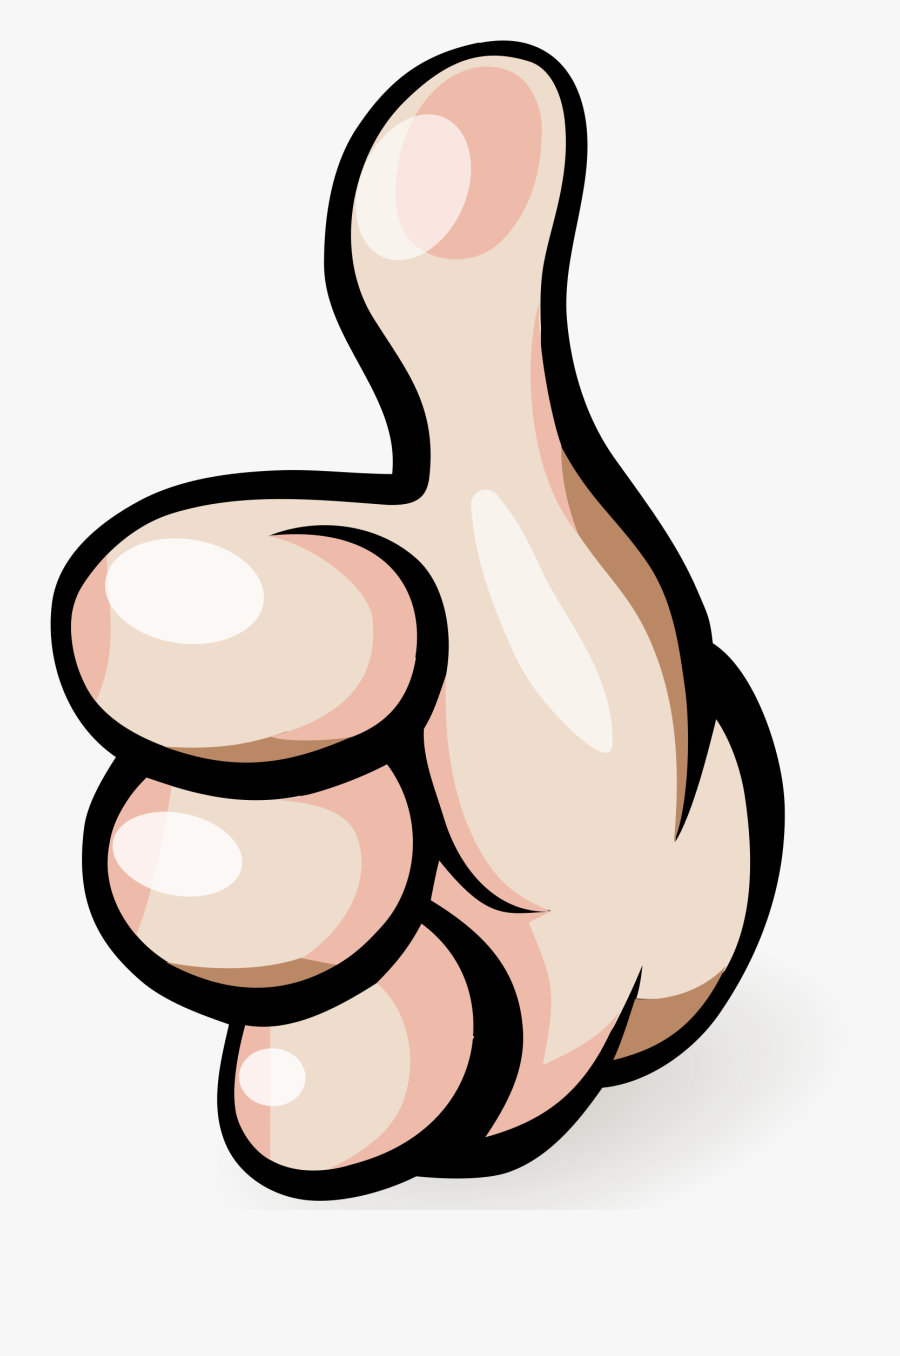 Work Clipart Thumbs Up - Thumb Up Png Icon, Transparent Clipart